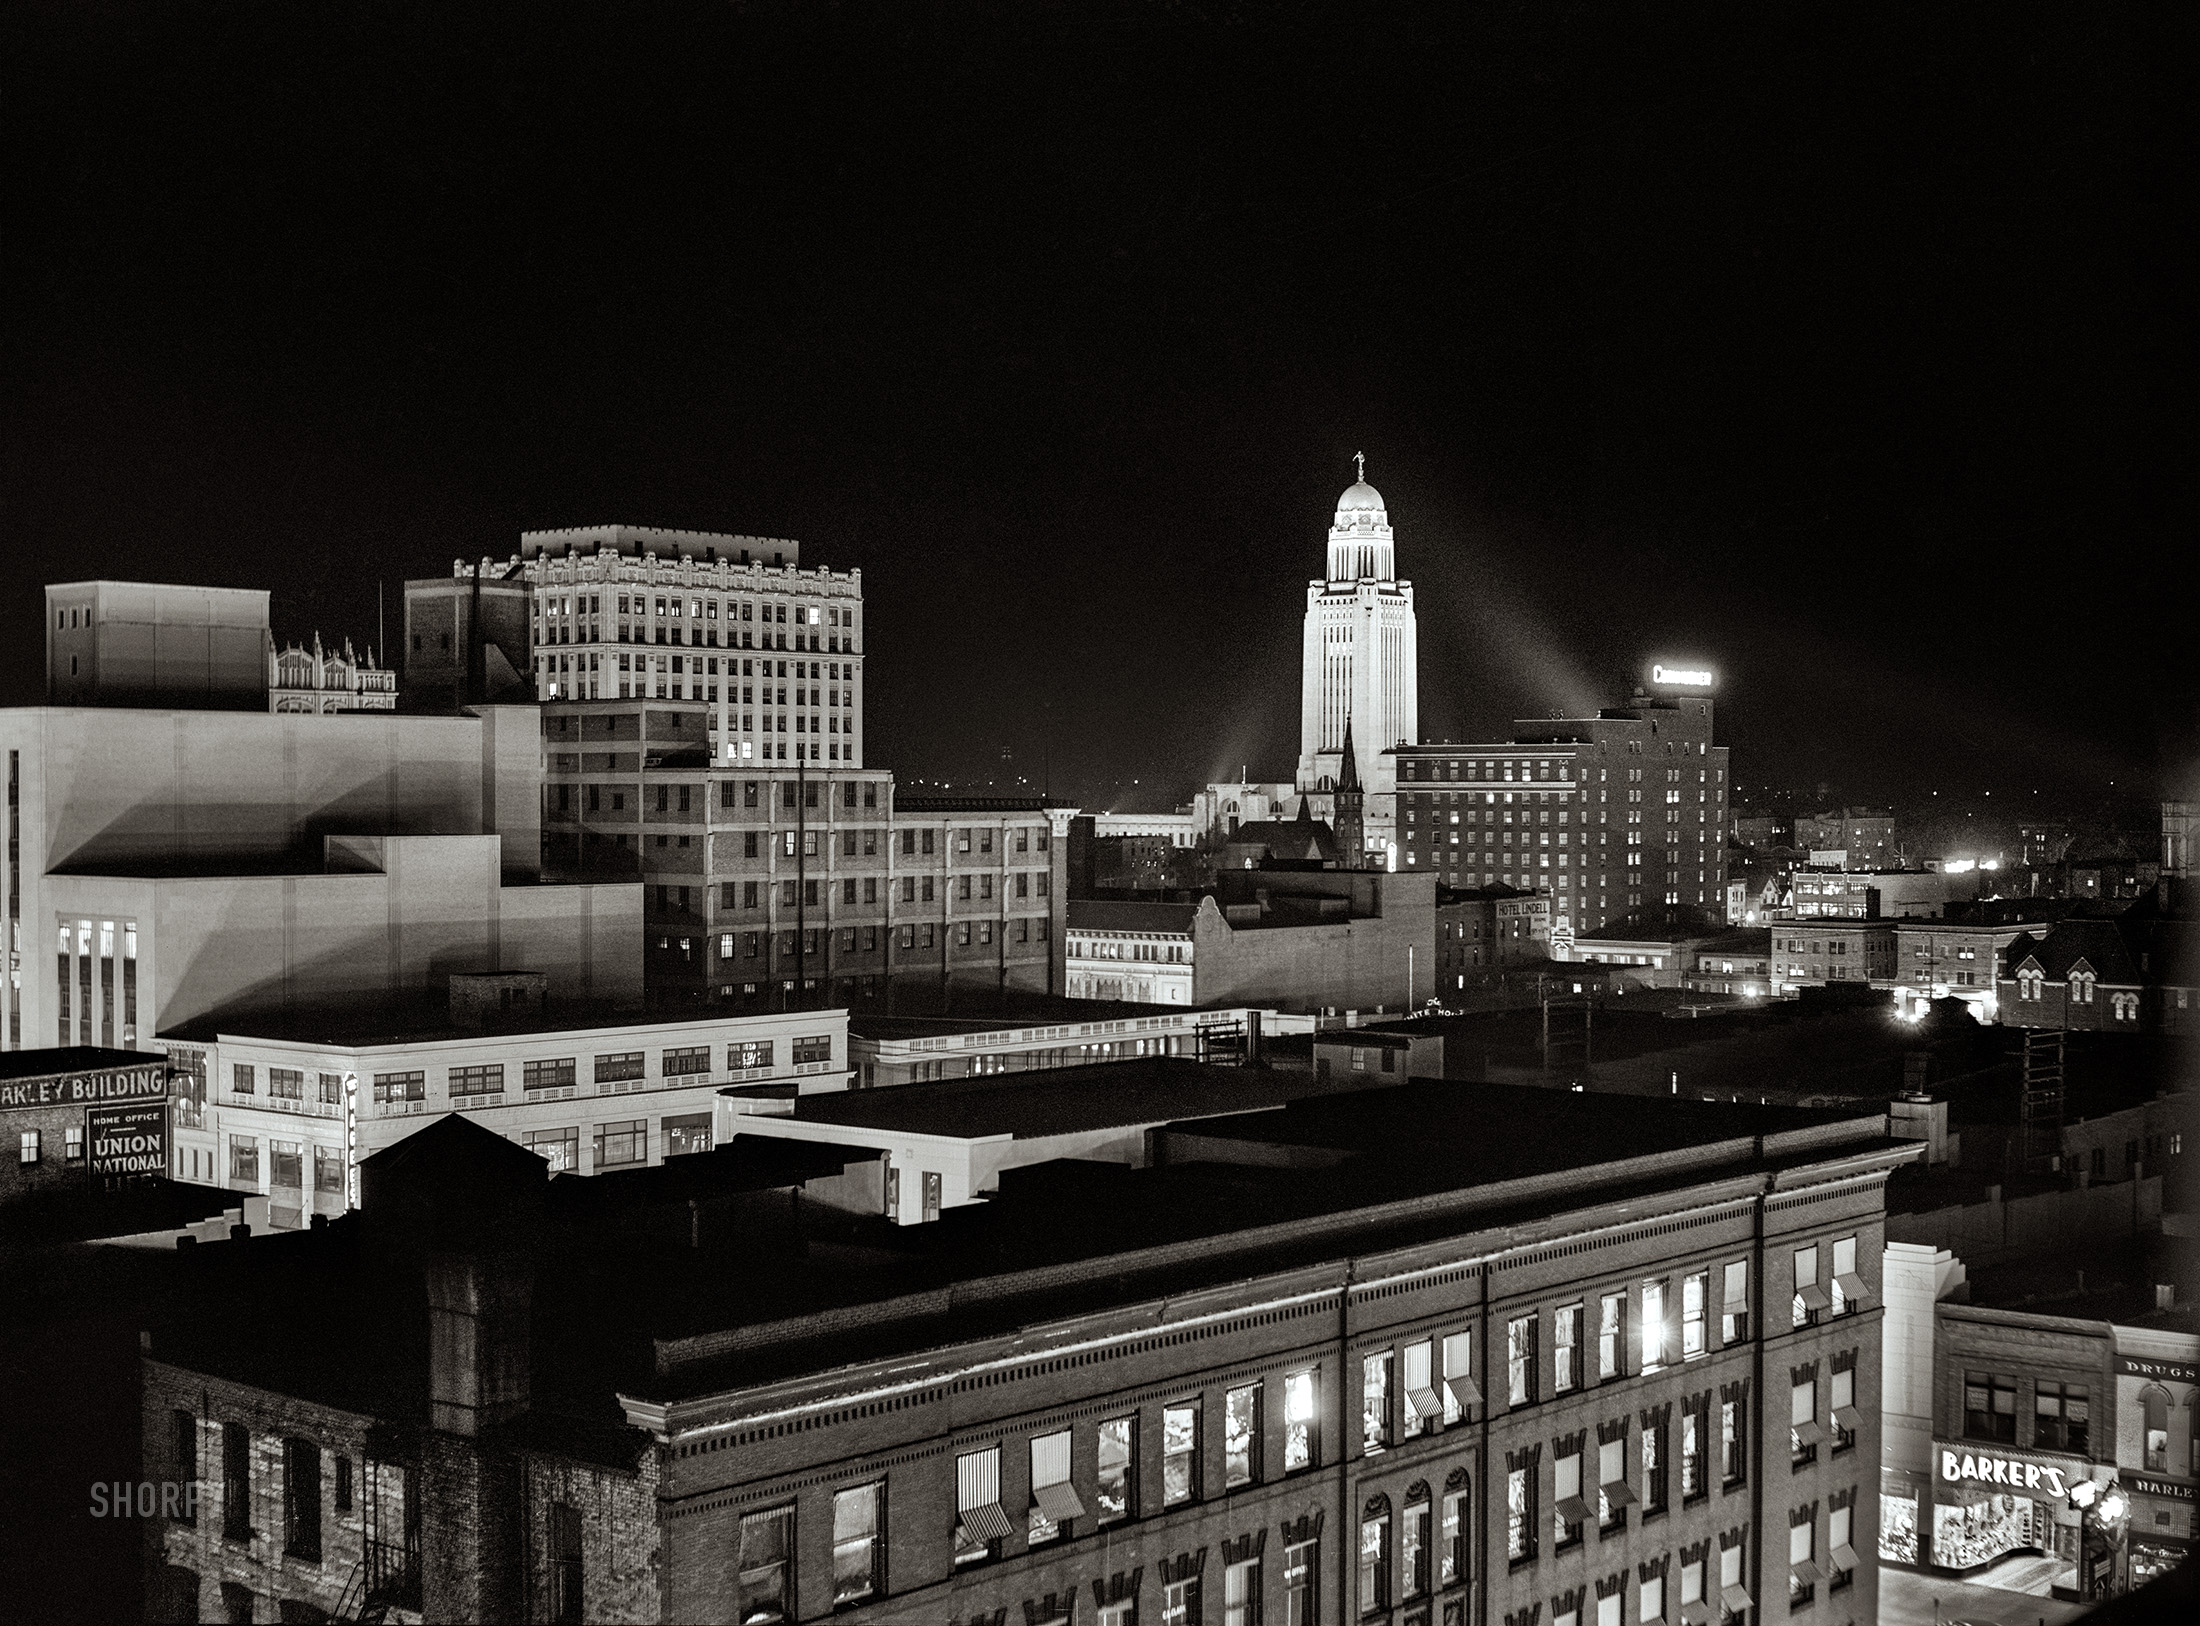 November 1940. "Lincoln, Nebraska. State capitol in background." Medium format acetate negative by John Vachon for the Farm Security Administration. View full size.